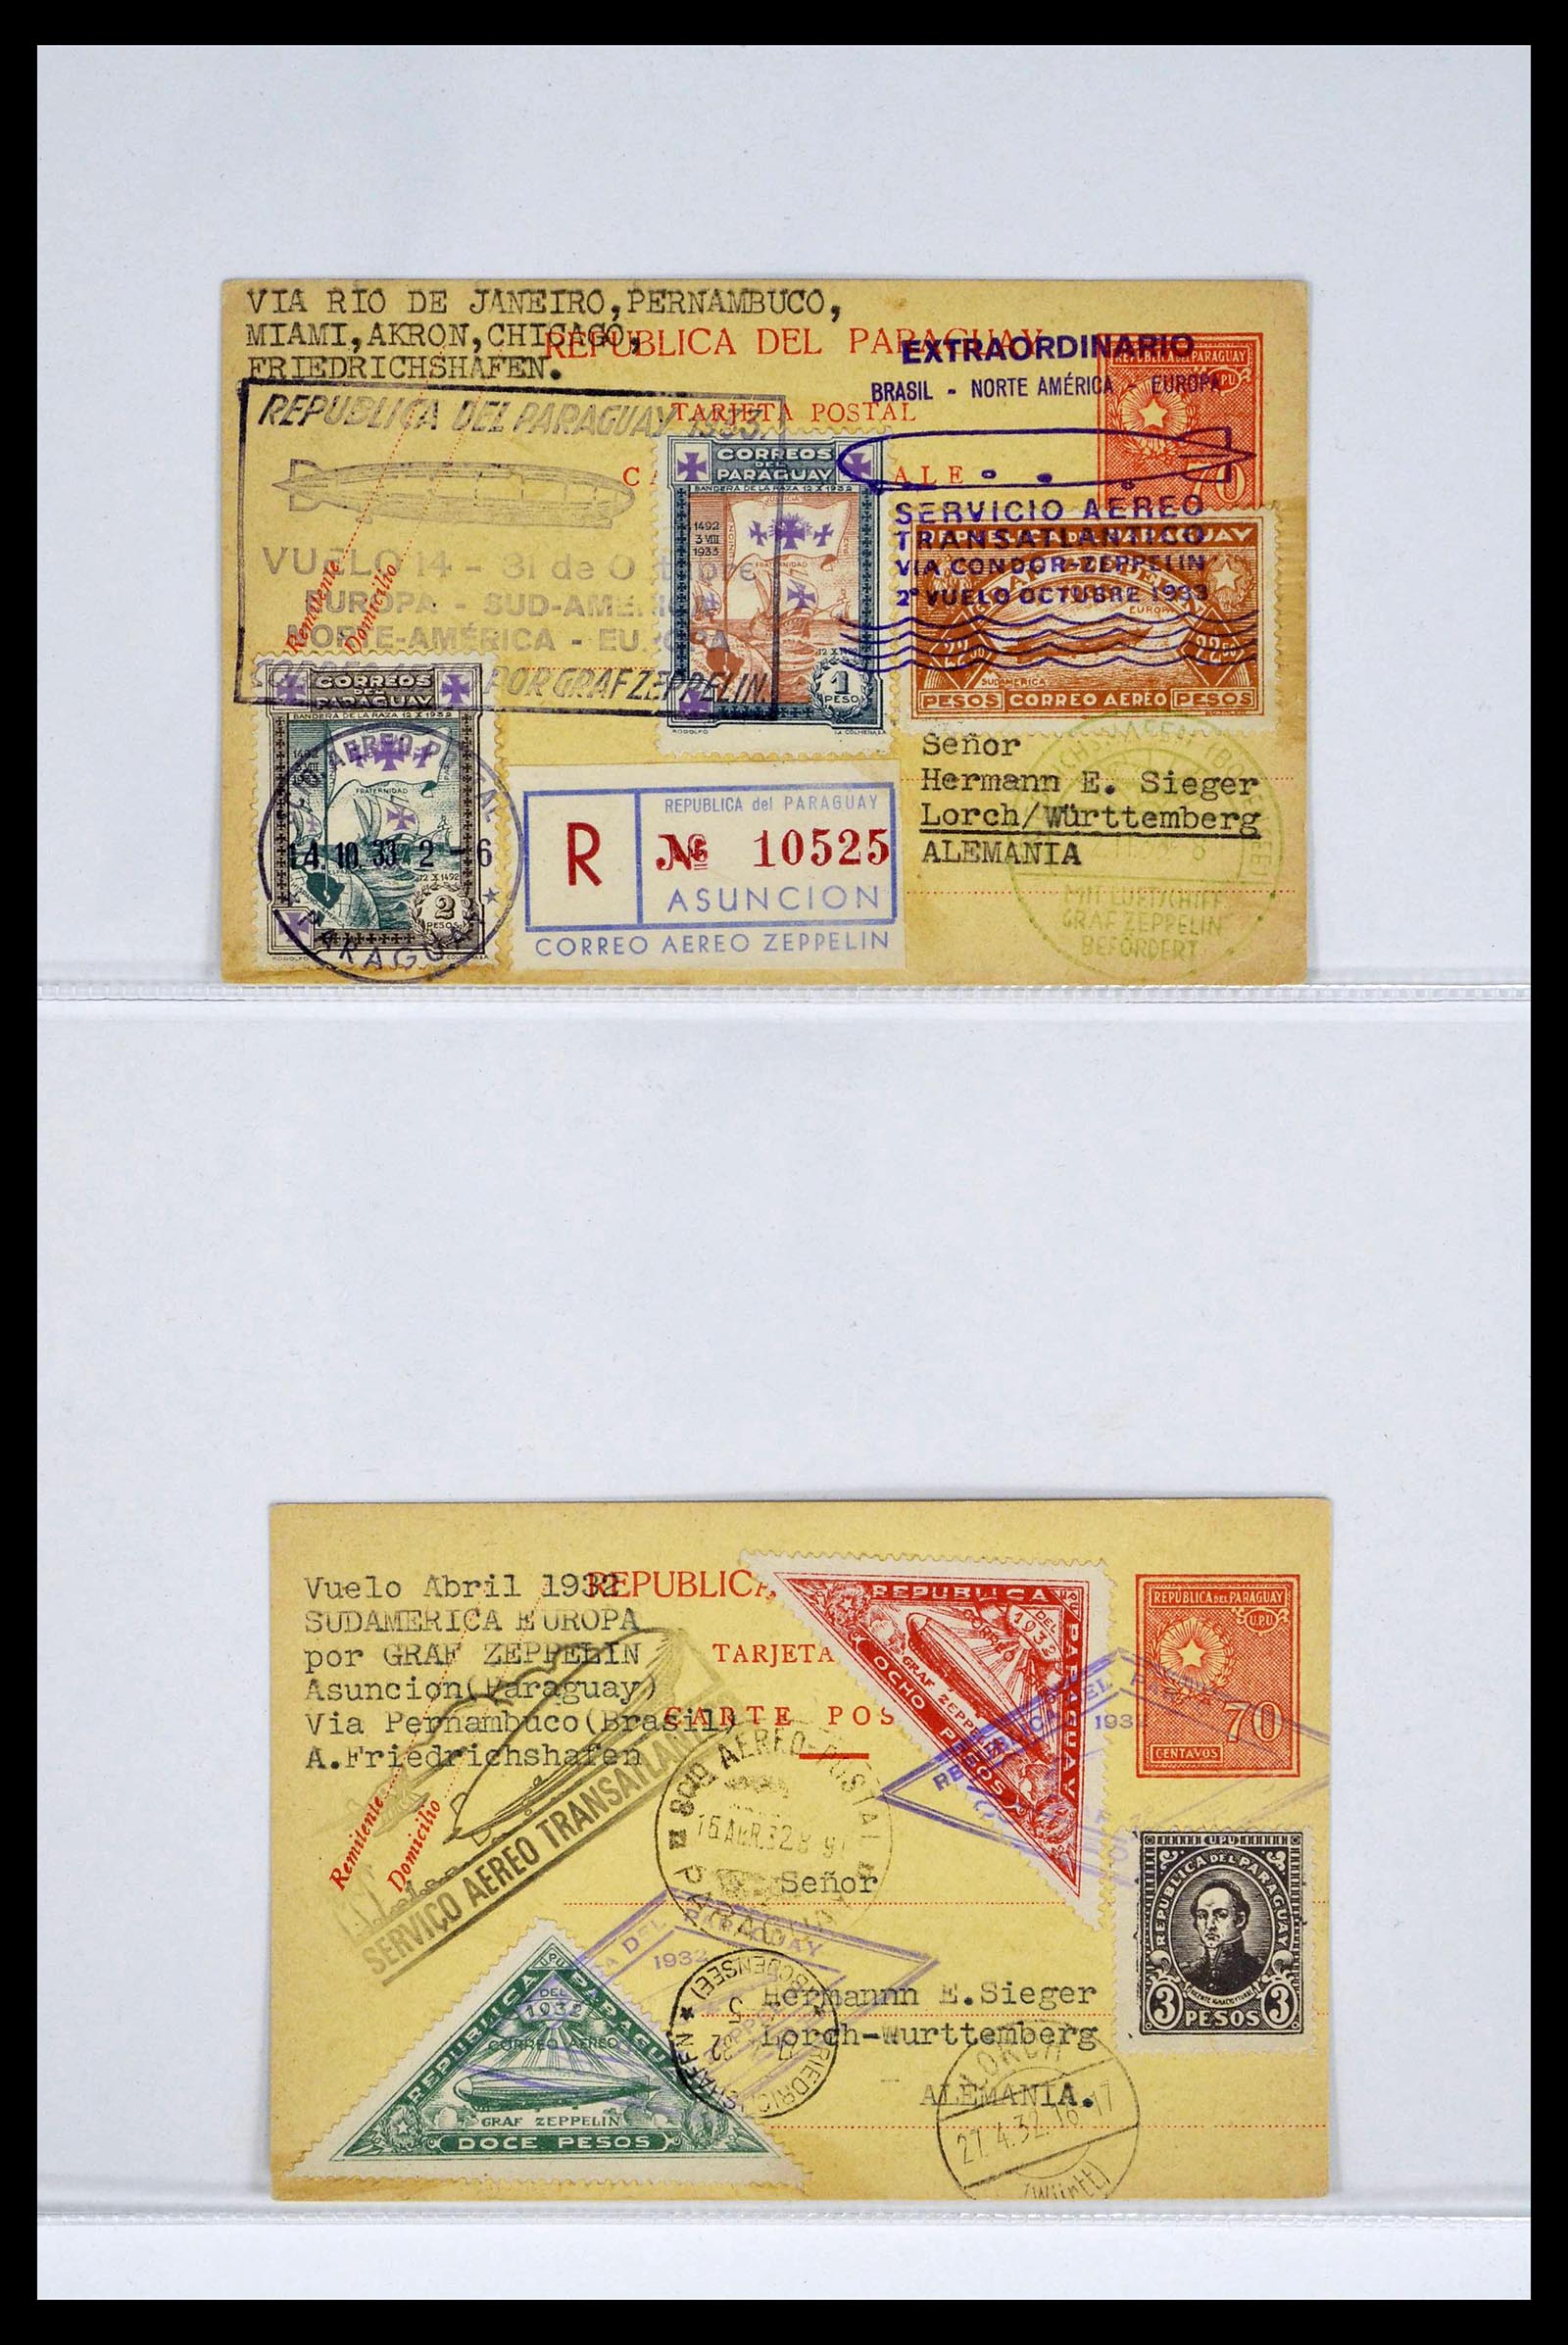 39141 0005 - Stamp collection 39141 Zeppelin covers 1930-1936.